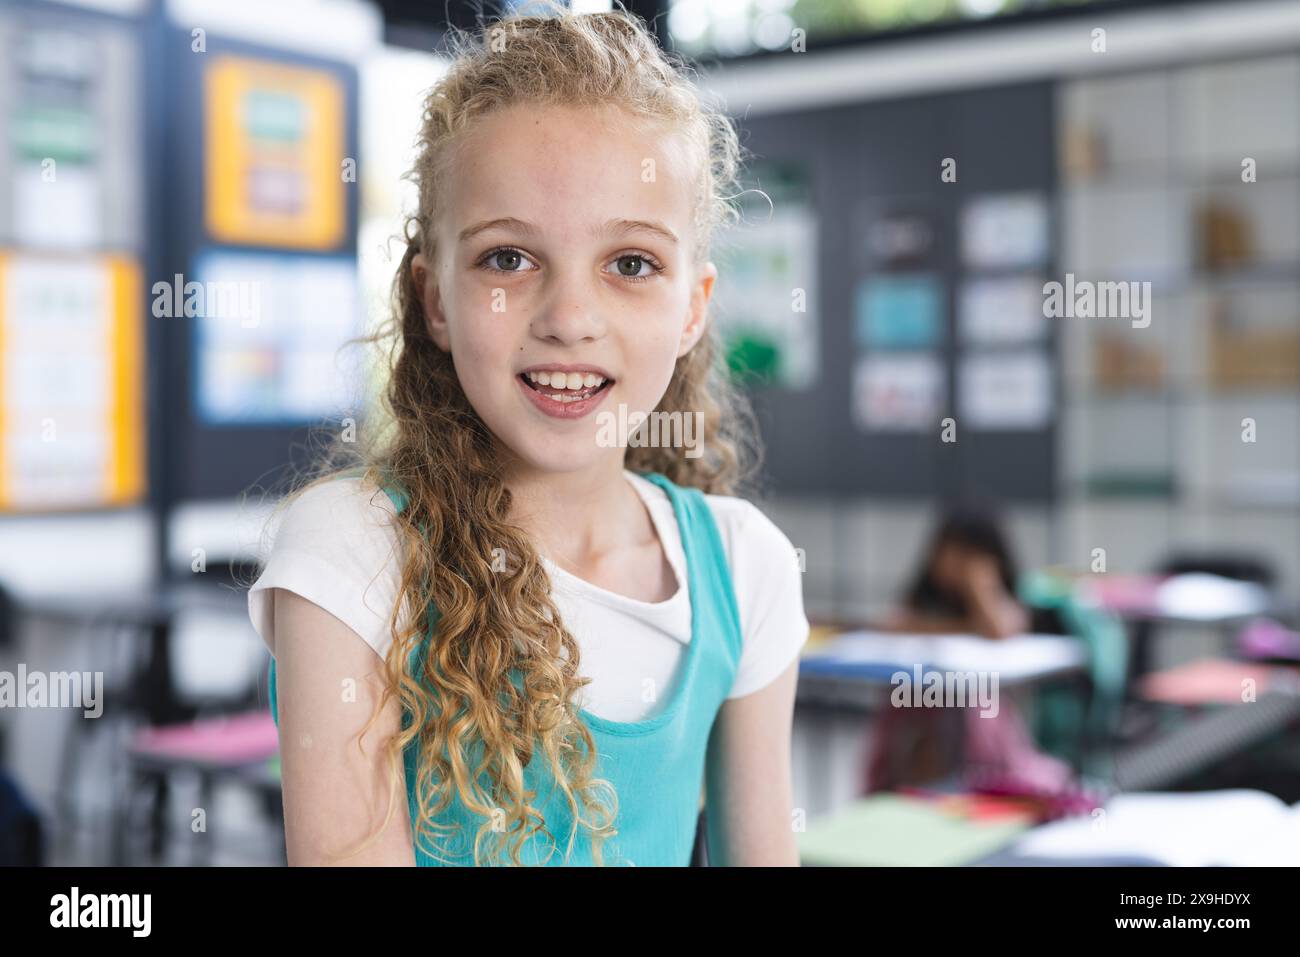 Caucasian girl with curly blonde hair stands in a school classroom Stock Photo